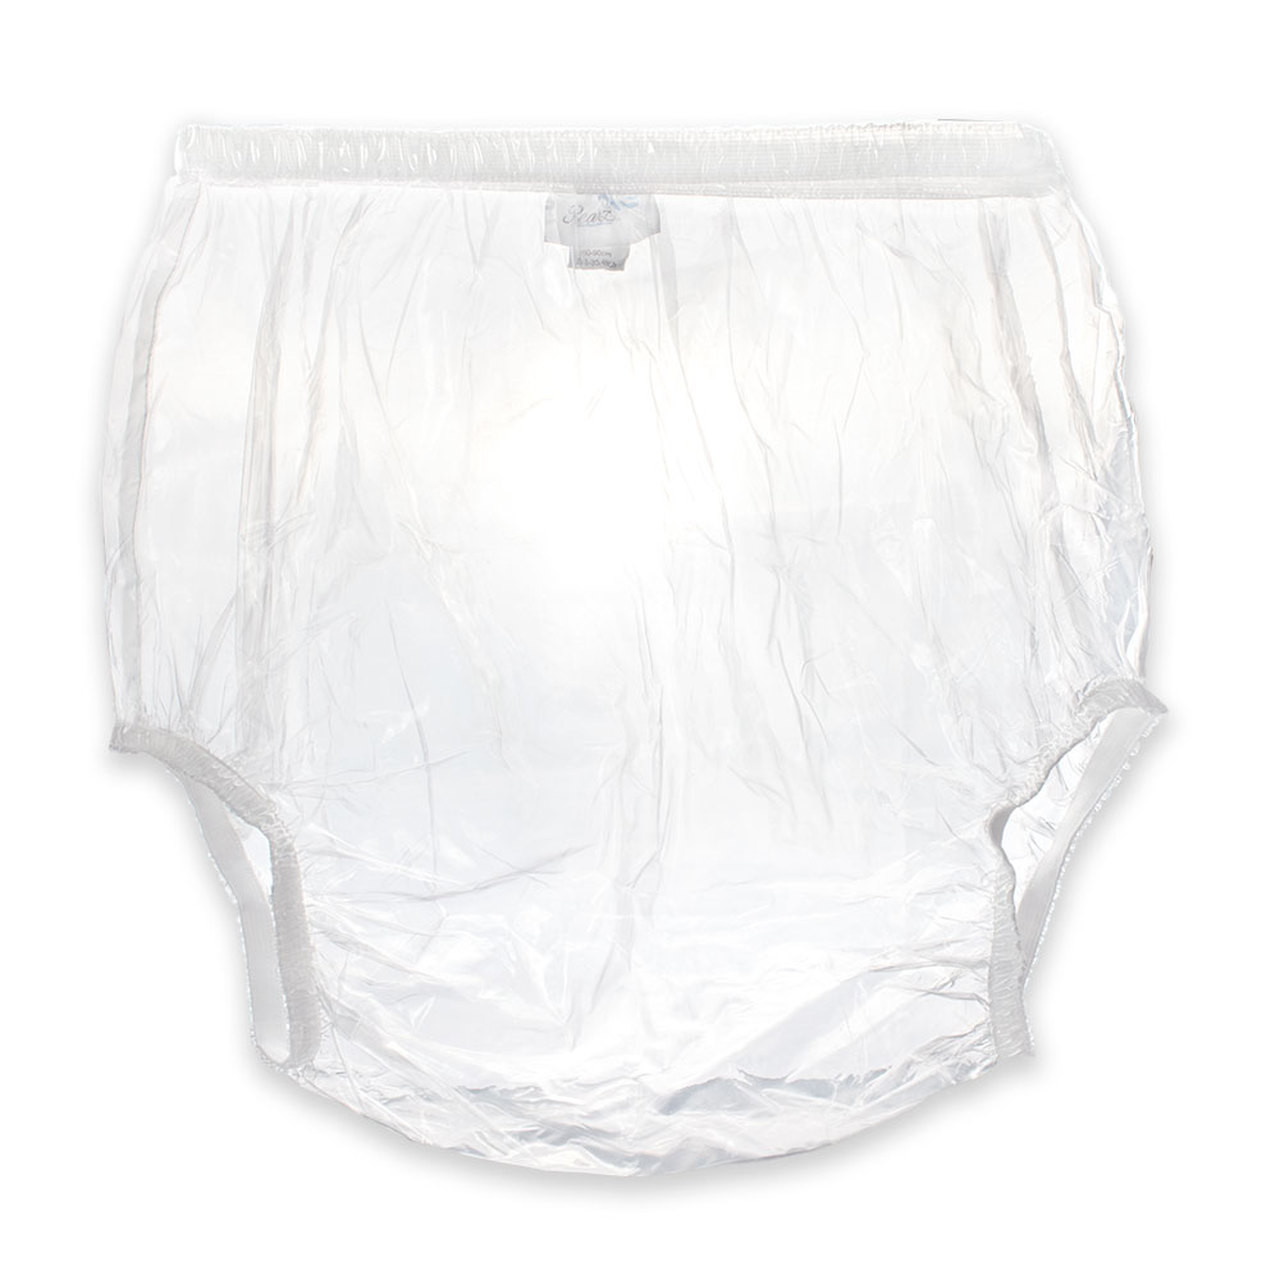 Ideal Fit Plastic Pants - Crystal Clear